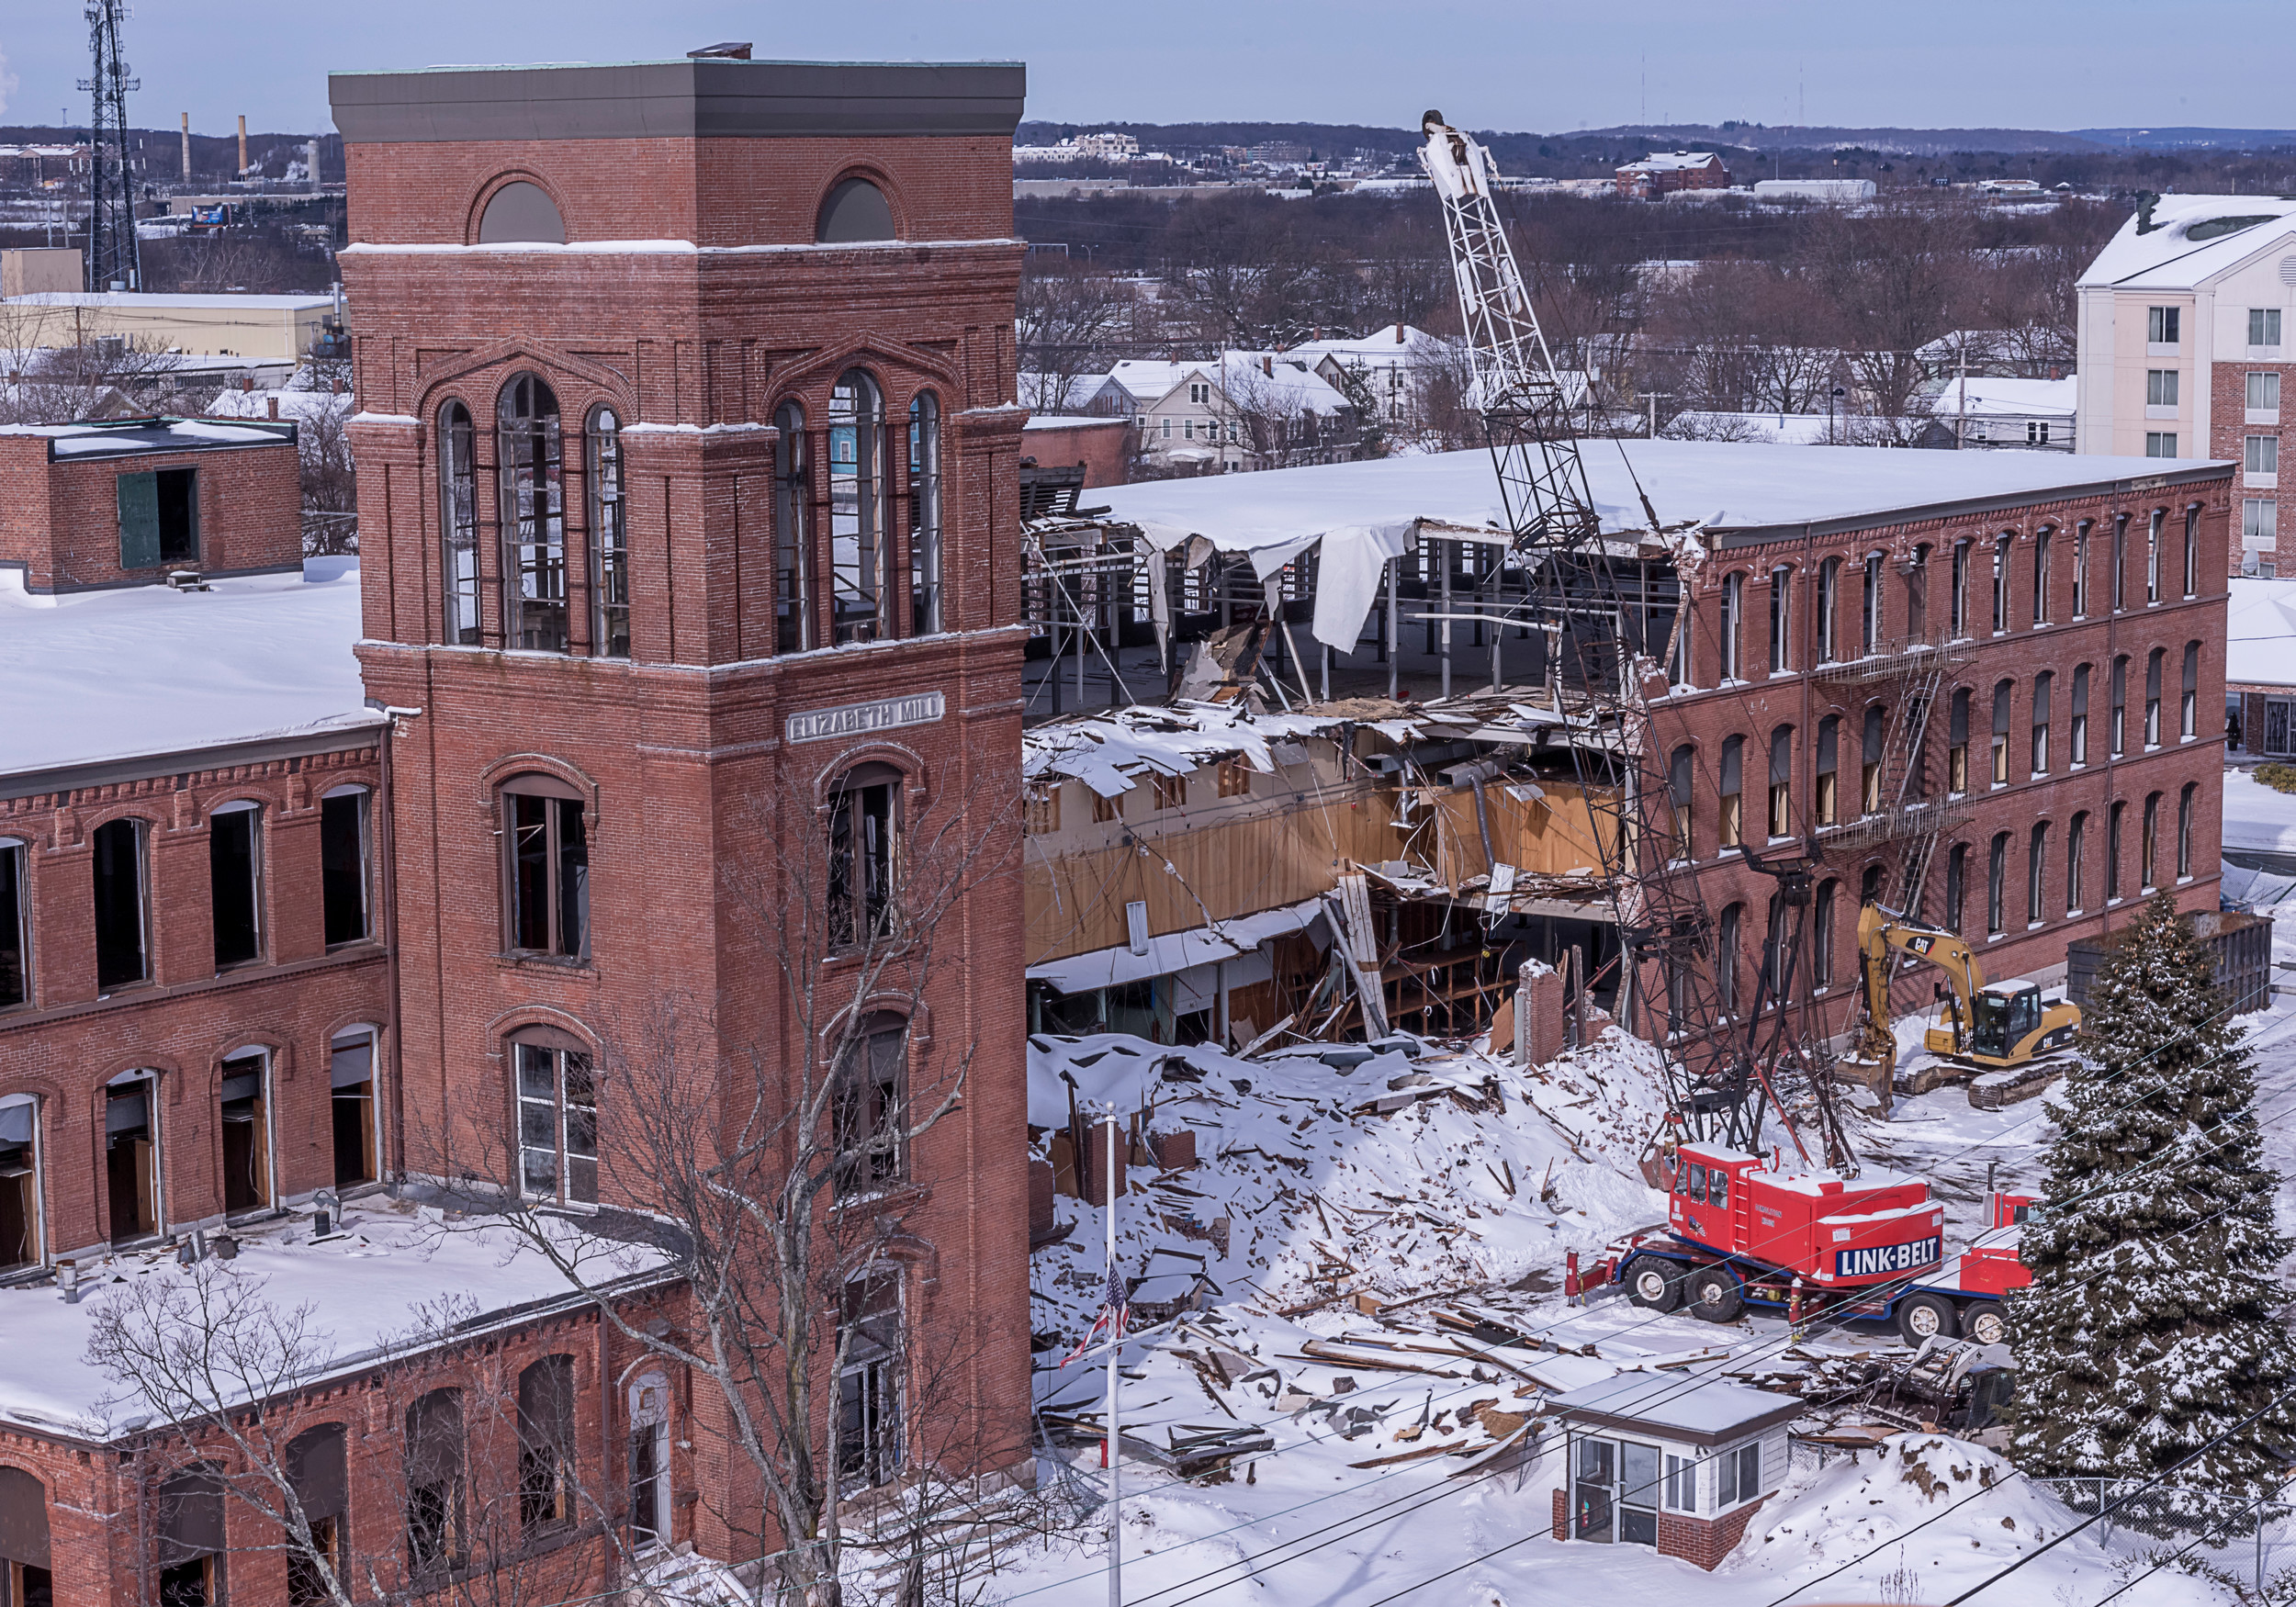 AFTER FINDING IT NOT FEASIBLE to redevelop the Elizabeth Mill in Warwick near T.F. Green Airport, Michael Integlia & Company began demolition of the 19th-century structure to make room for a 300,000-square-foot mixed-use building. / PBN PHOTO/ MICHAEL SALERNO